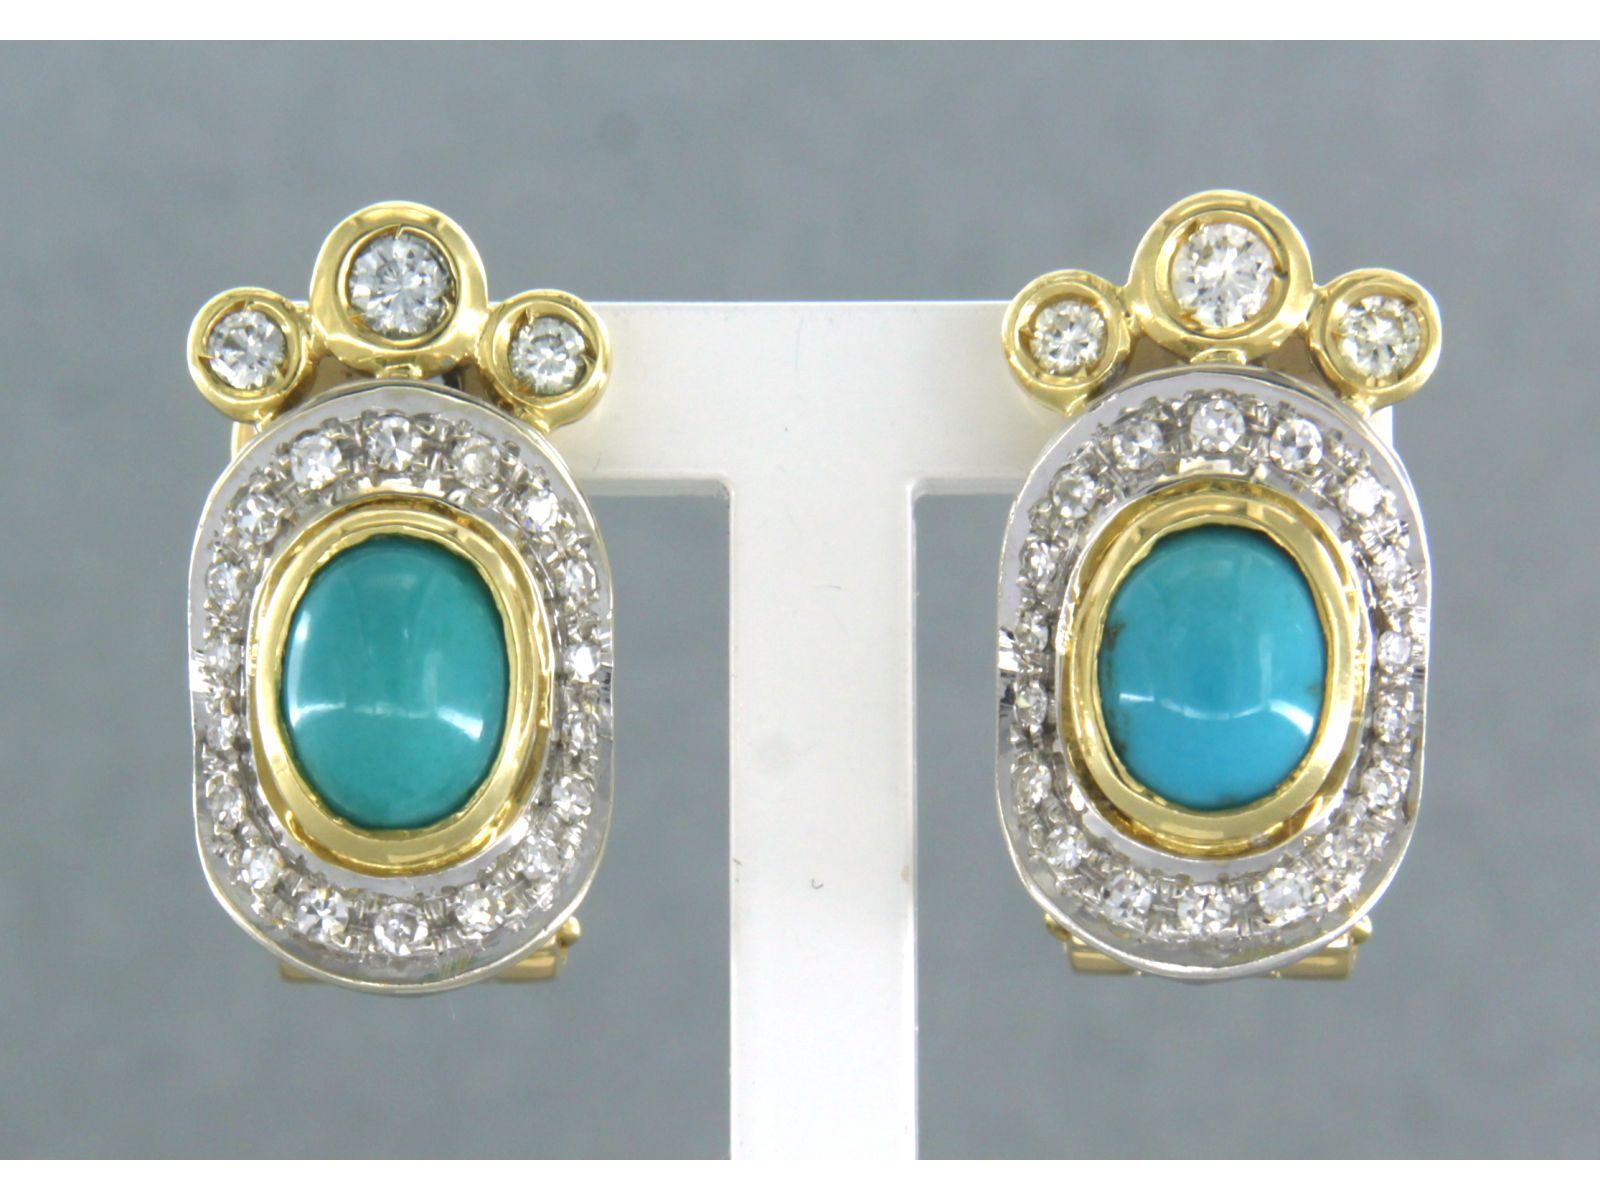 18k bicolour gold ear clips set with turquoise and brilliant and single cut diamond 0.50ct - F/G - VS/SI

detailed description

the top of the ear stud is 2.1 cm long by 1.1 cm wide

weight 10.7 grams

set with

- 2 x 5.5 mm x 7.0 mm oval cabochon